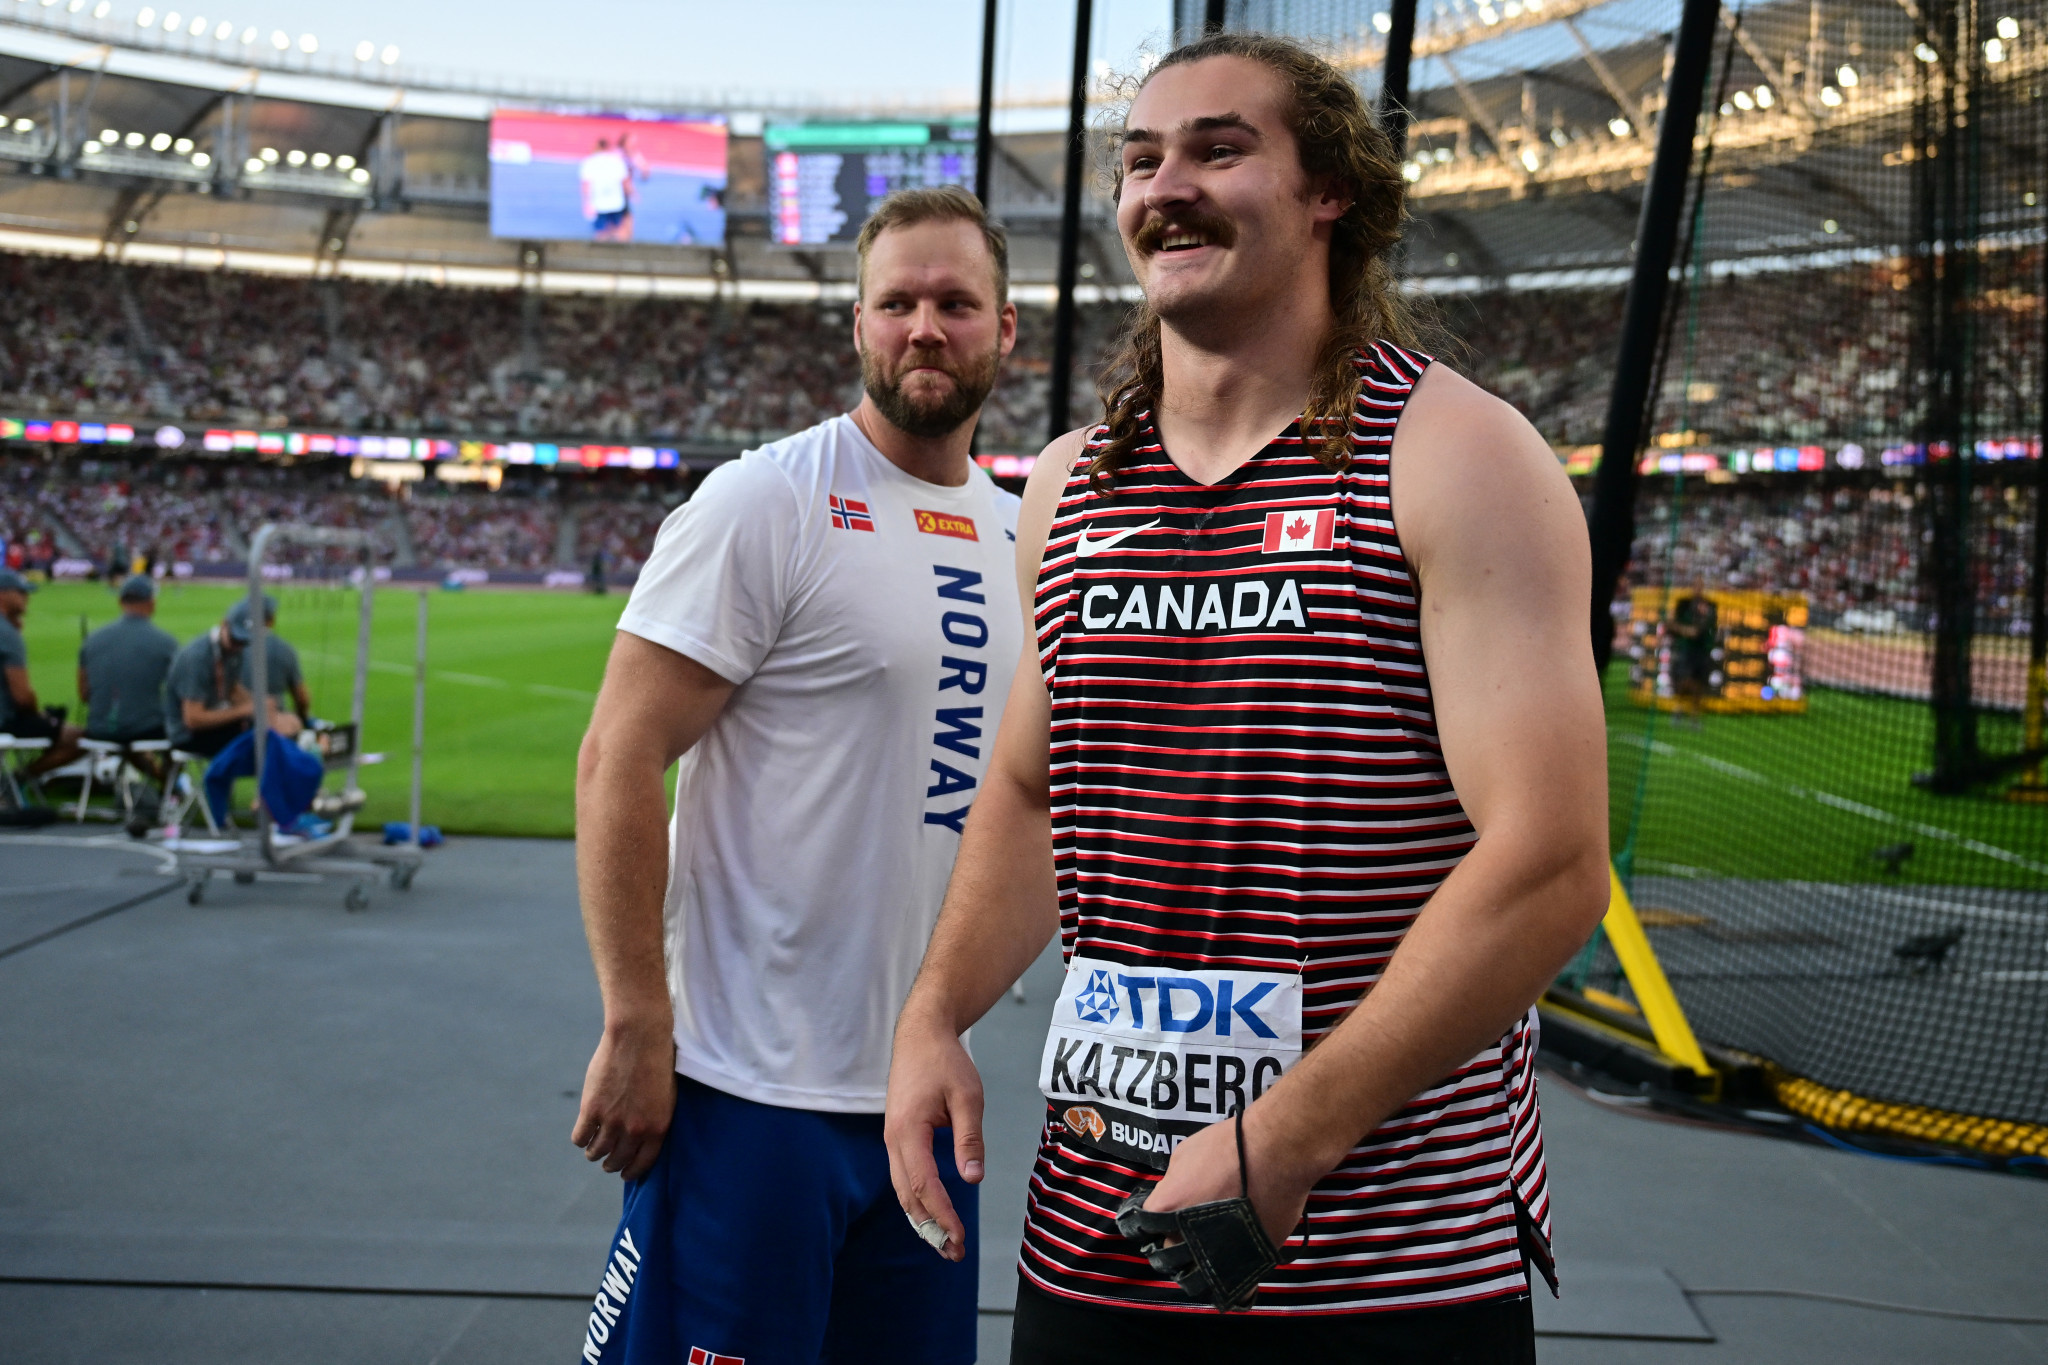 Canadian thrower Ethan Katzberg will be looking to deliver a hammer blow to his opponents in Paris. GETTY IMAGES